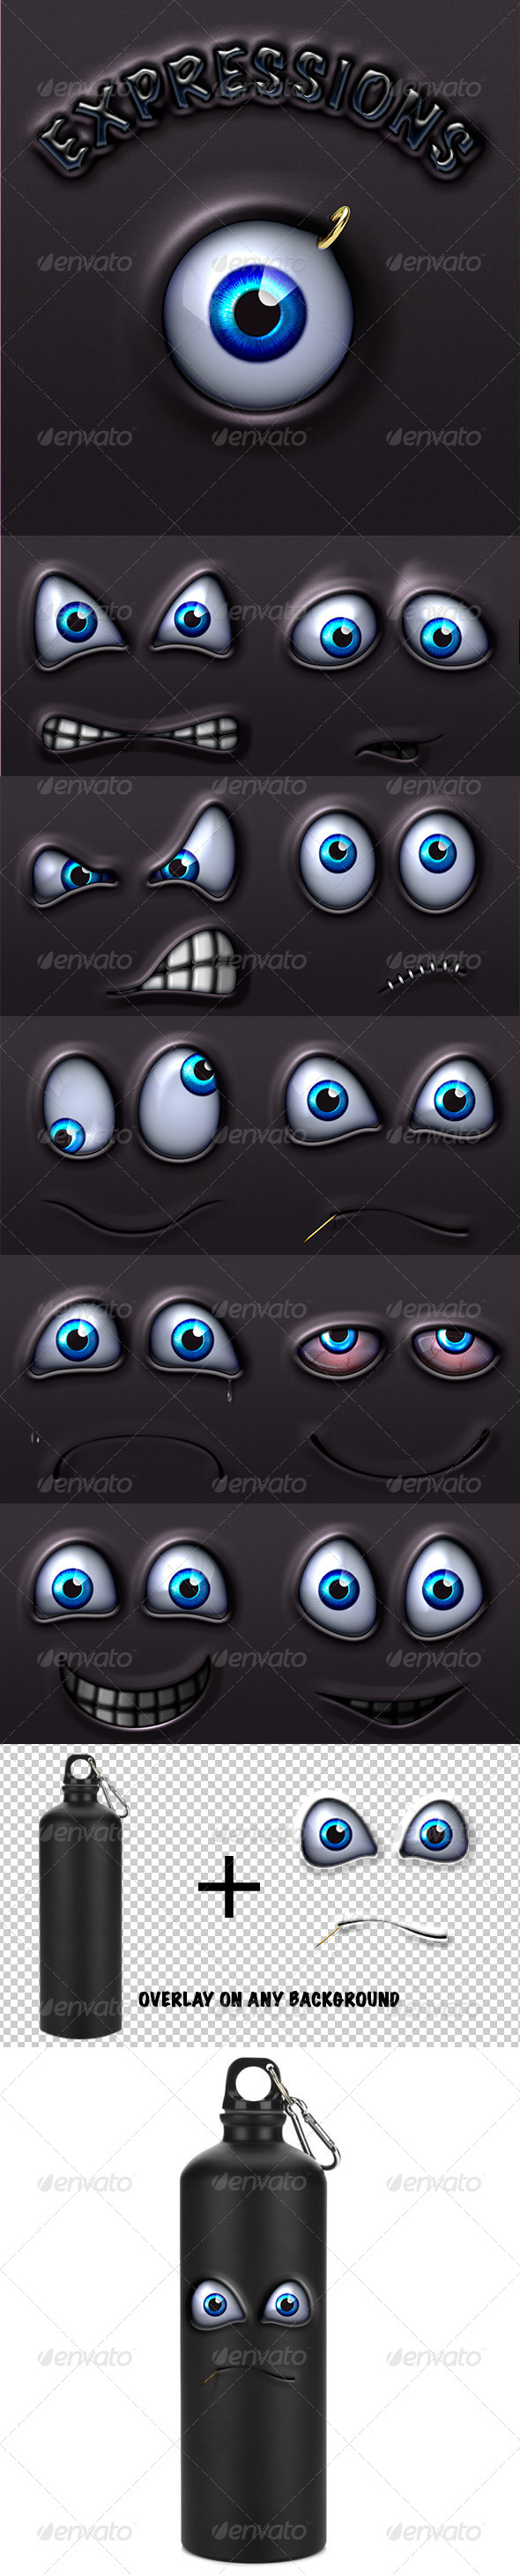 Character Expressions Pack 2